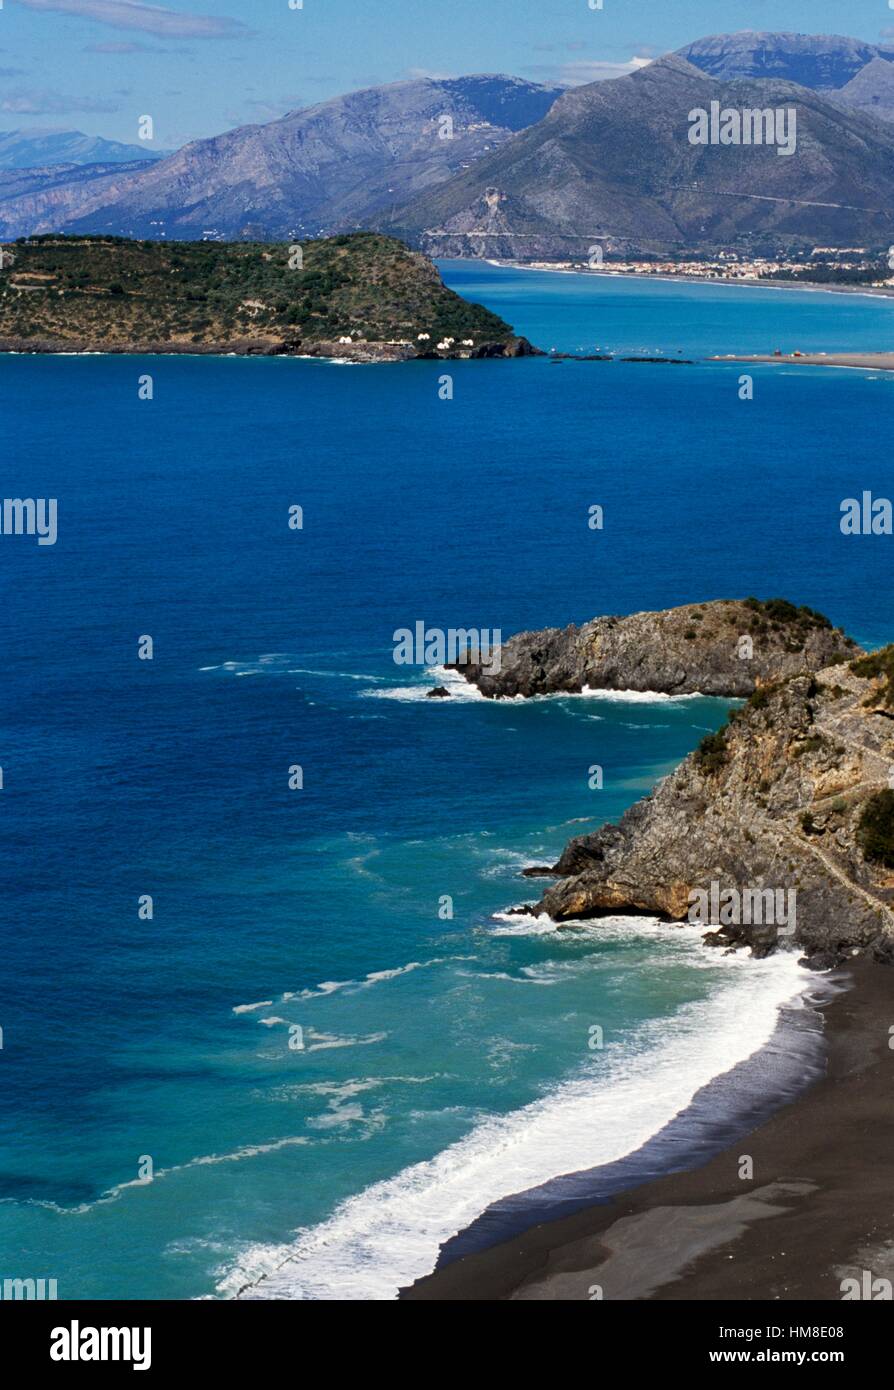 Coast near San Nicola Arcella, with Dino island on the left and the Praia a Mare gulf in the background, Calabria, Italy. Stock Photo